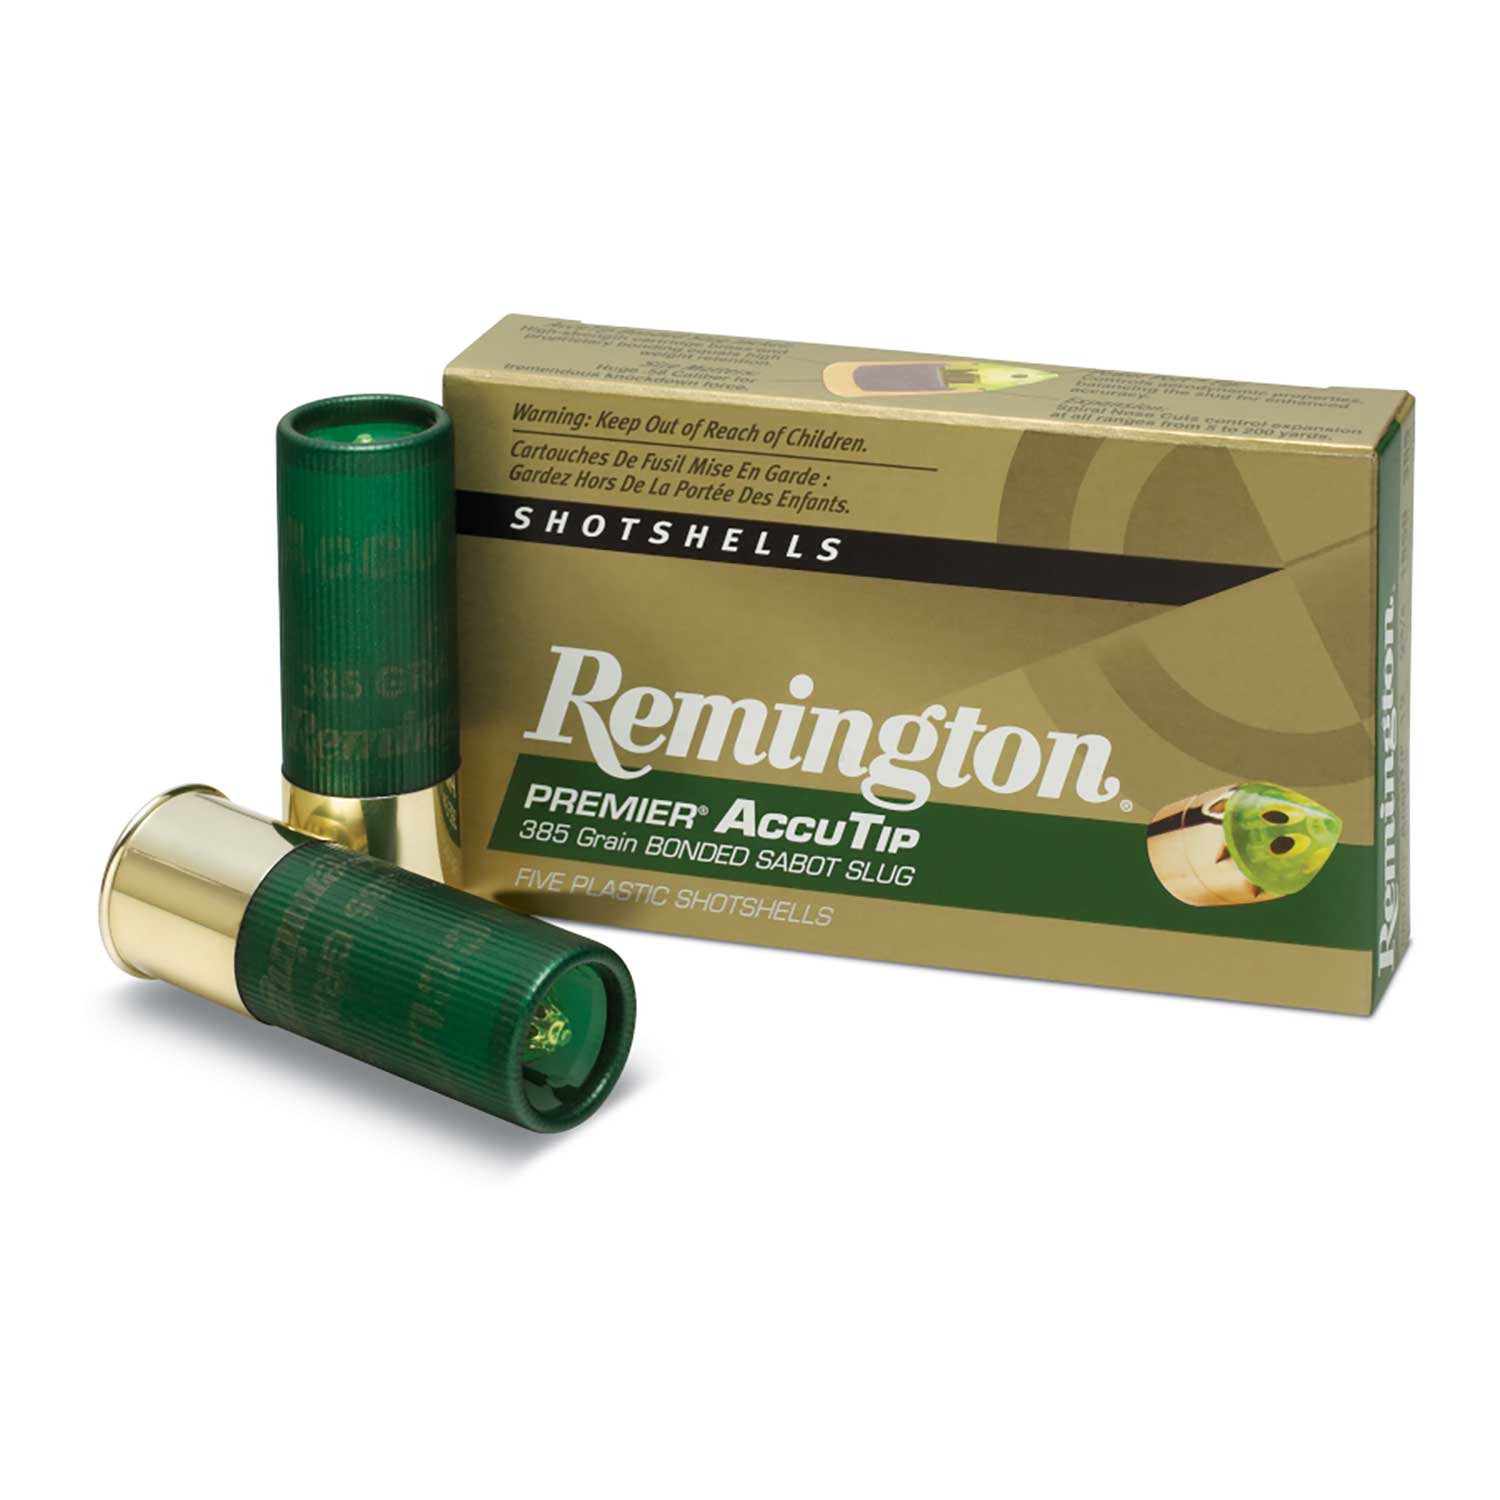 Remington's Accutip Sabot Slugs deliver a degree of accuracy and perfo...